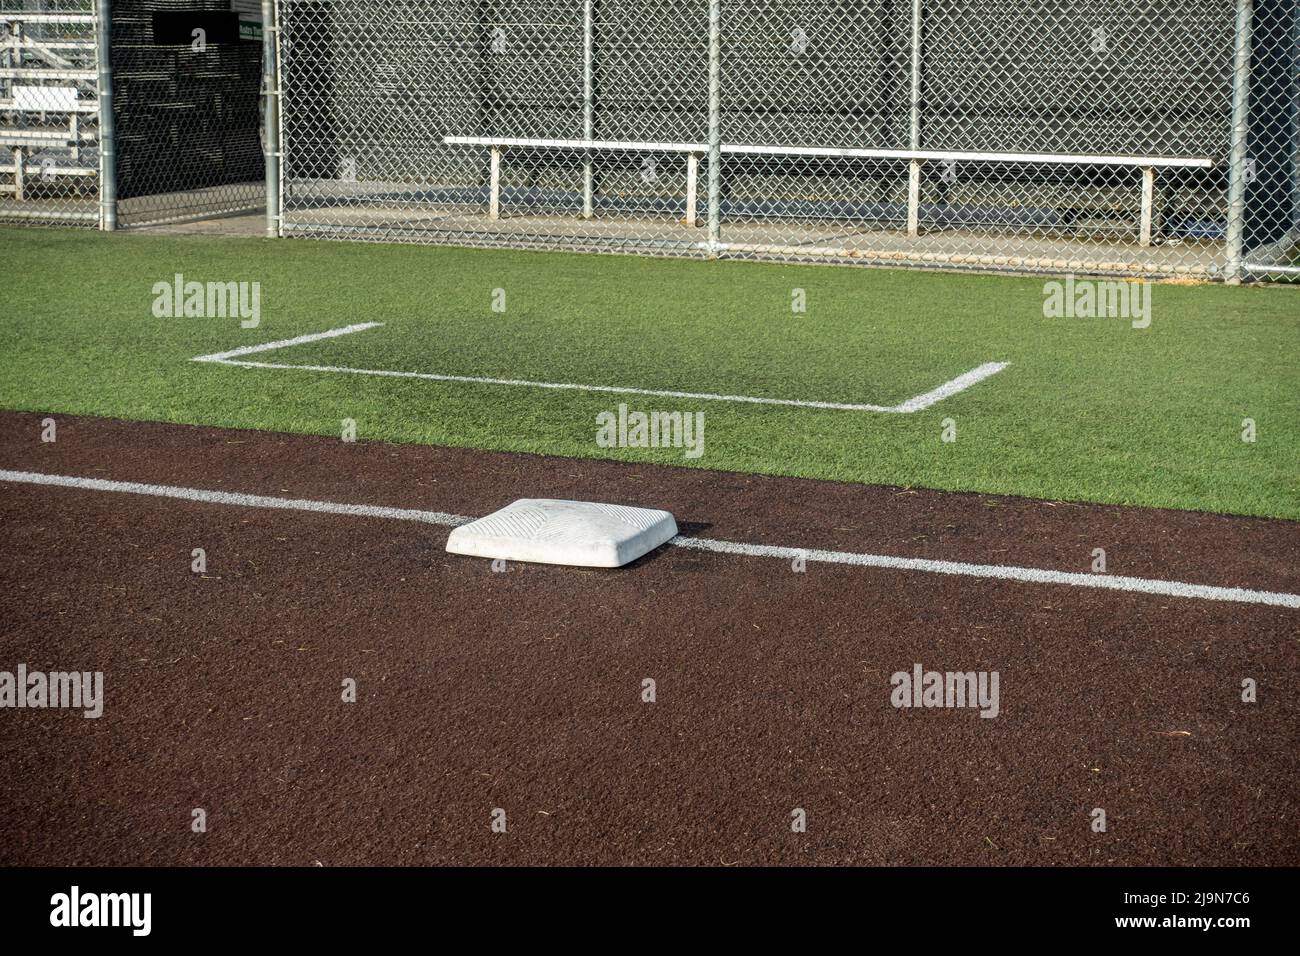 Angled view of a white base on a baseball field, with the view of a dugout in the background Stock Photo